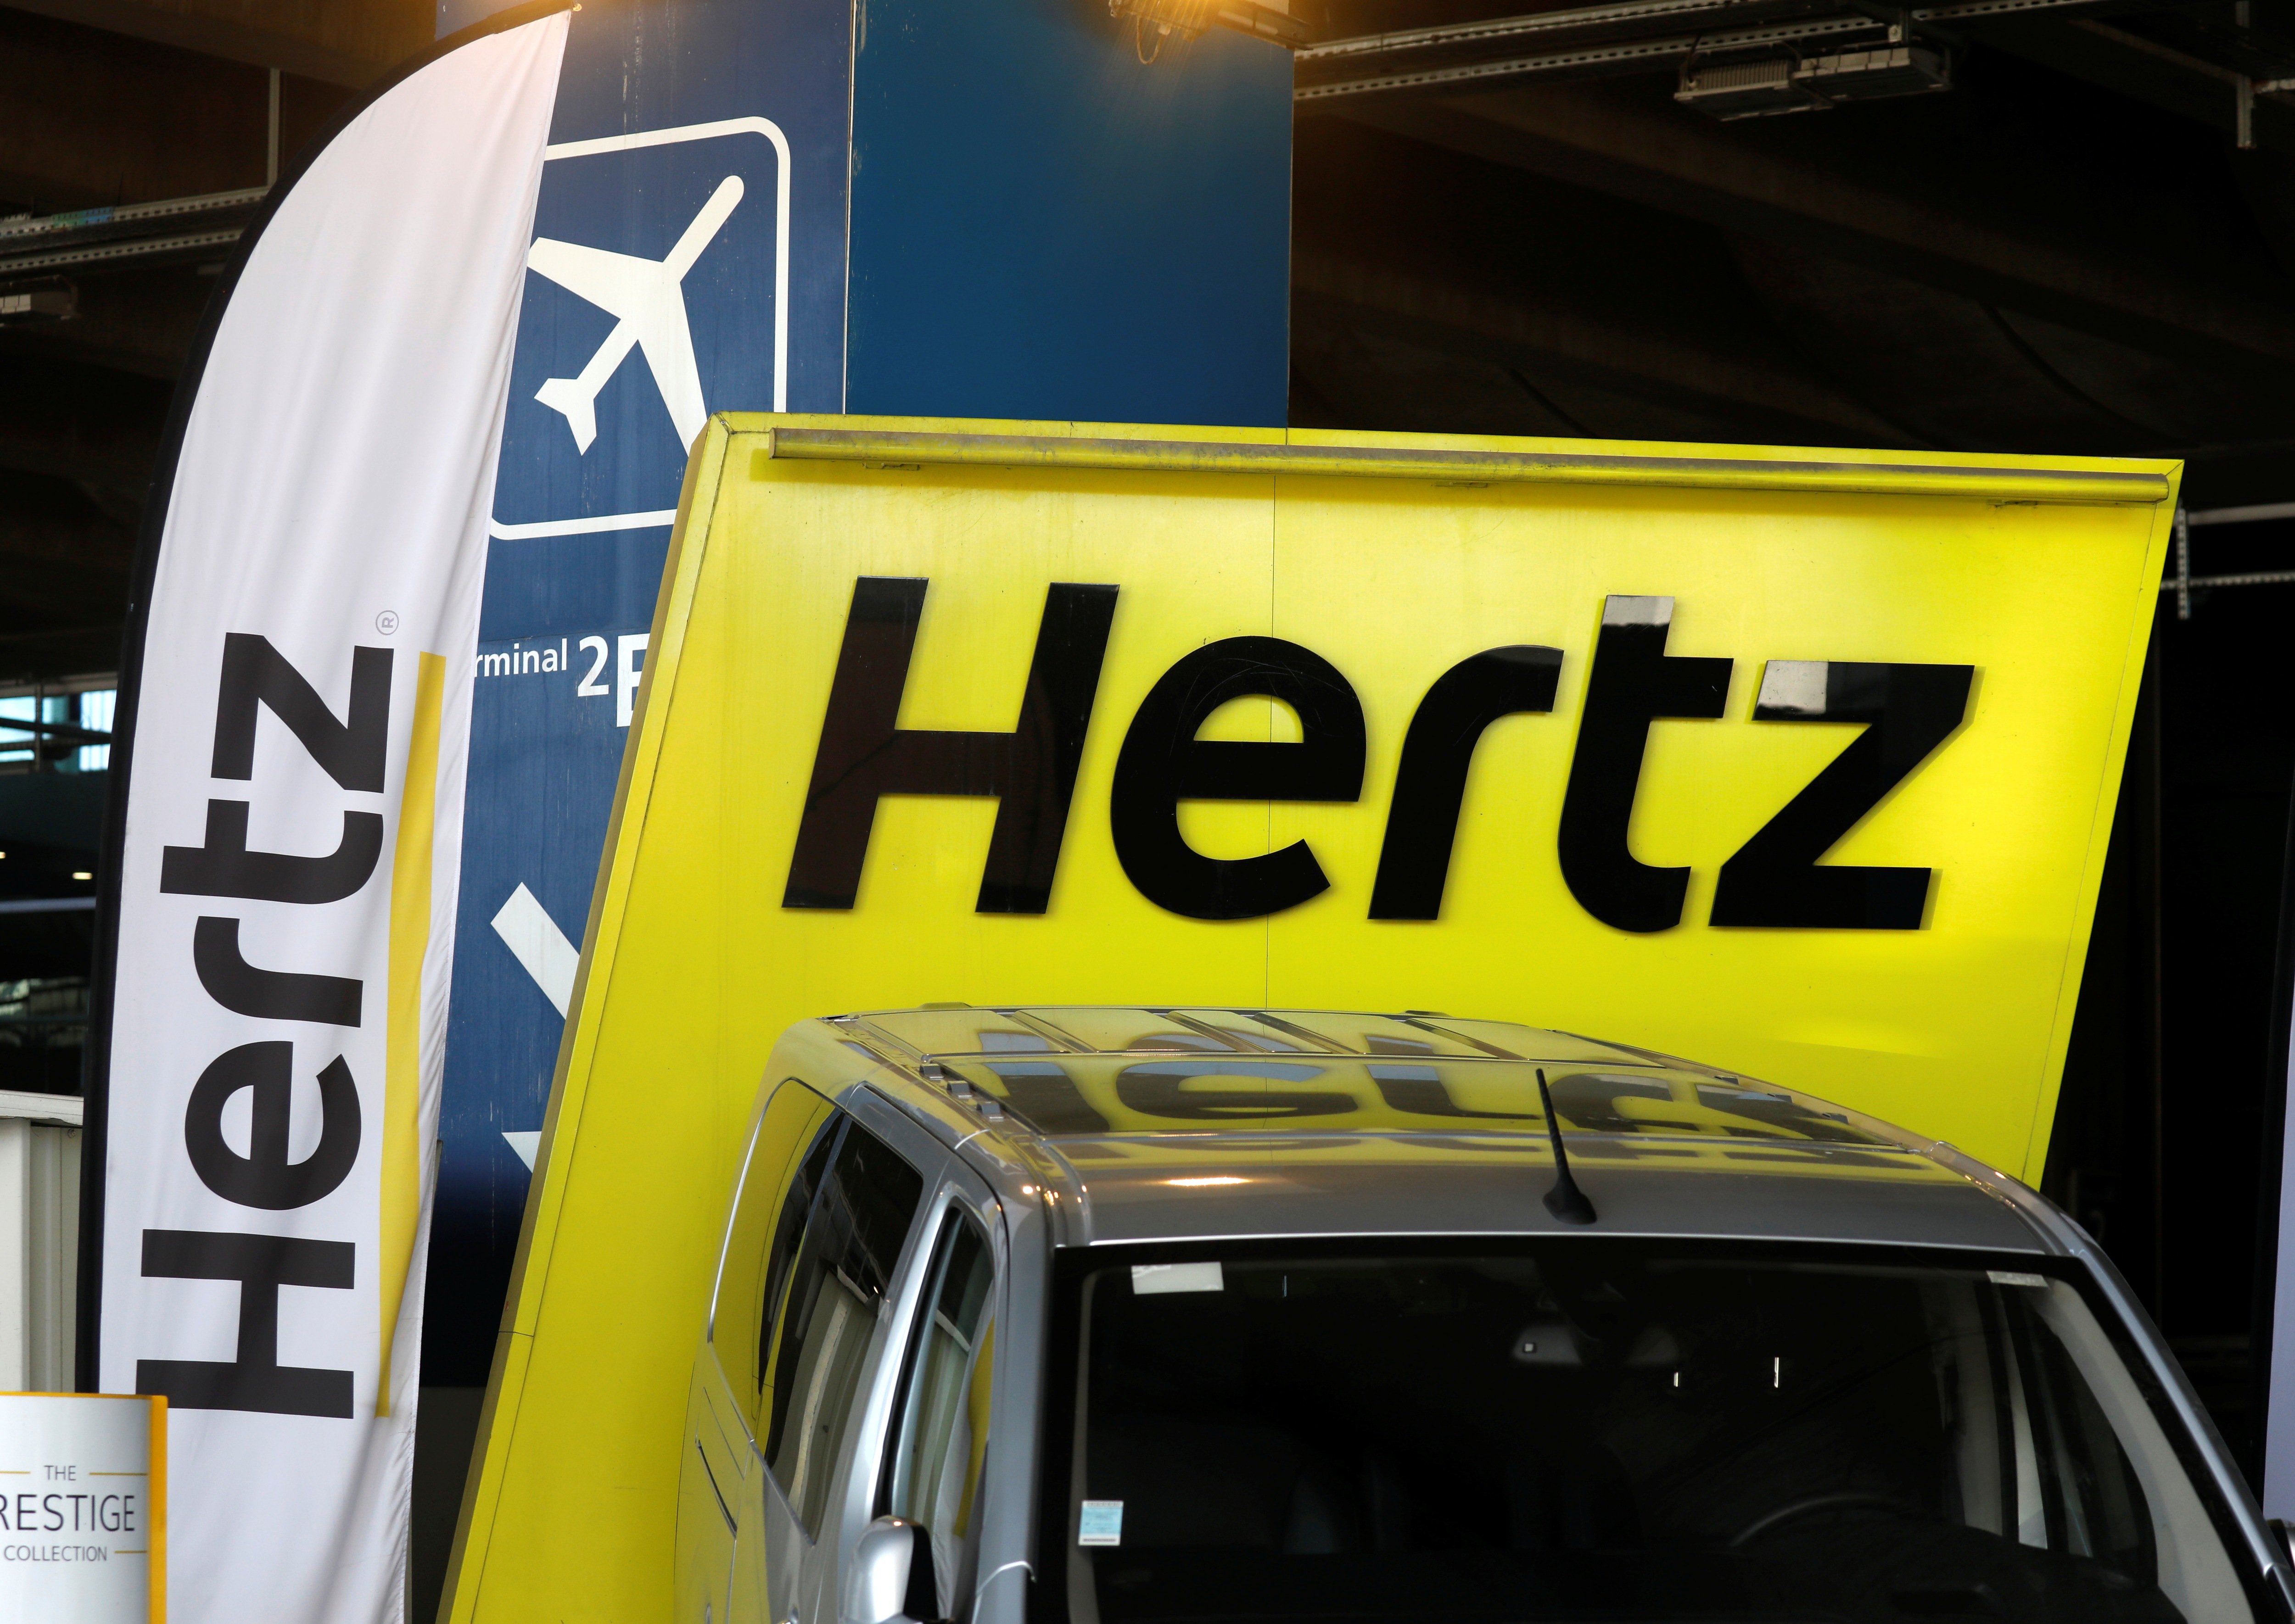 Logos of car rental company Hertz are seen outside Paris Charles de Gaulle airport in Roissy-en-France during the outbreak of the coronavirus disease (COVID-19) in France May 19, 2020. REUTERS/Charles Platiau